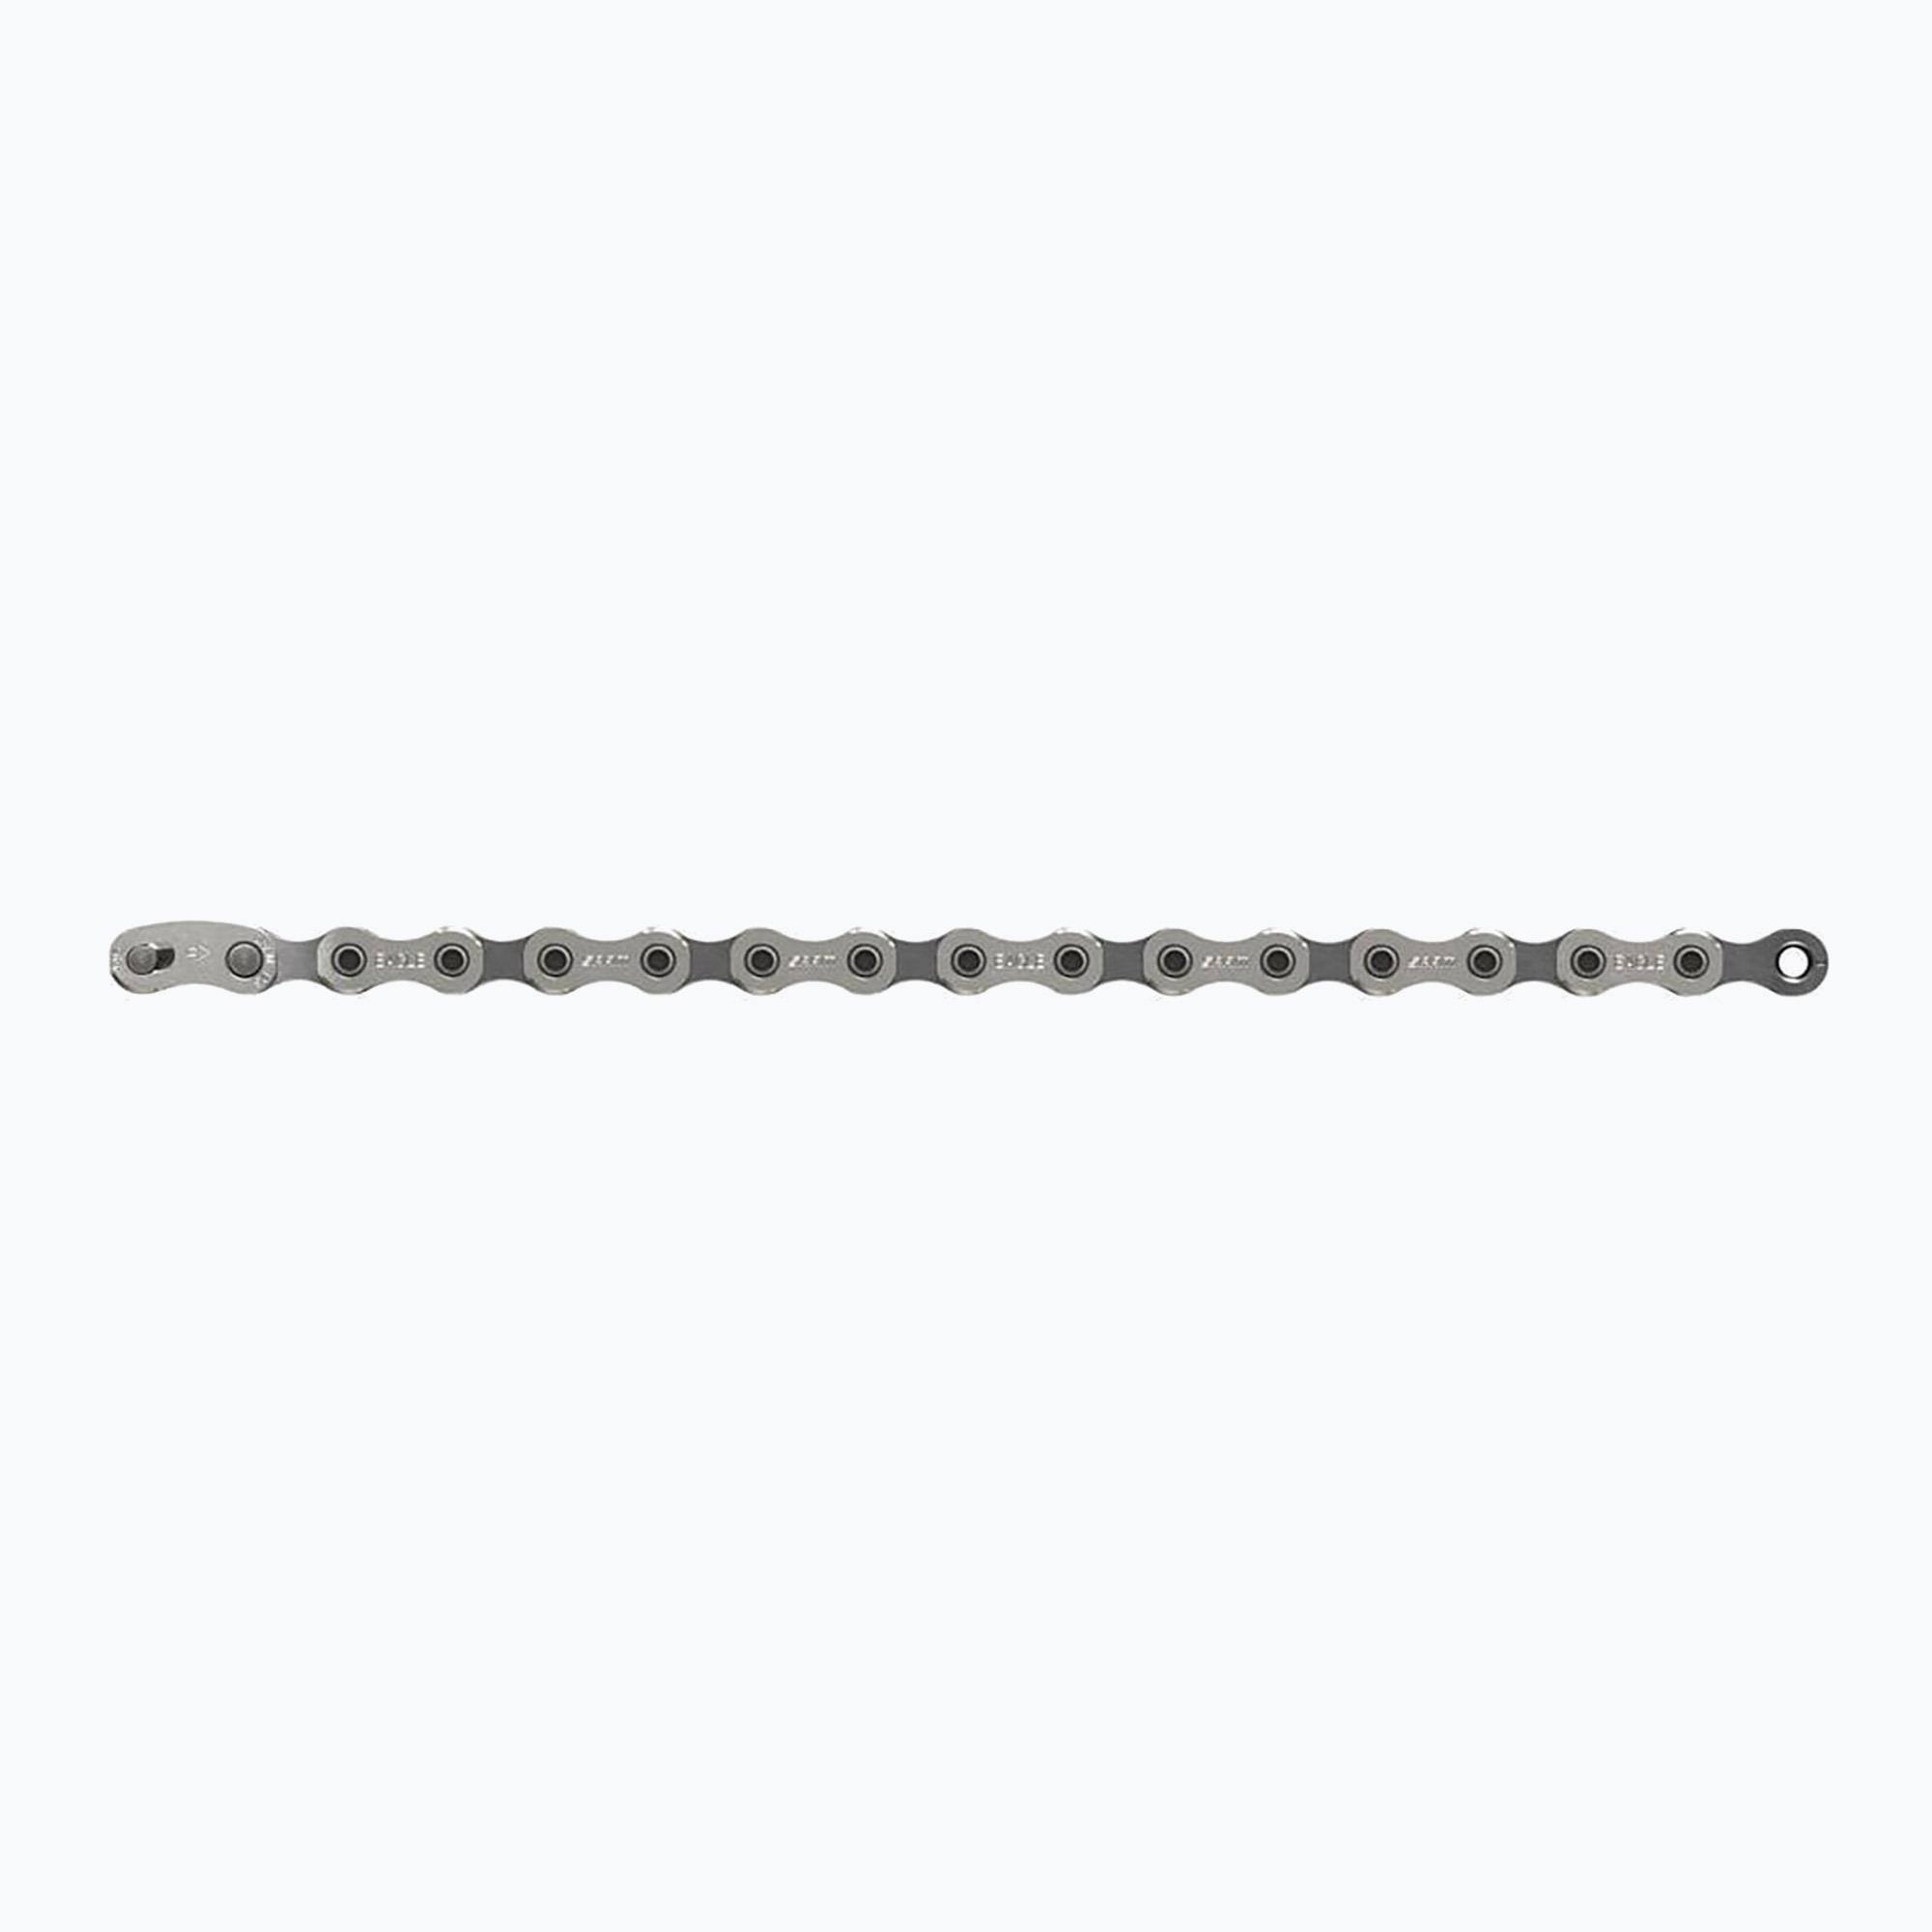 Sram NX Eagle Bicycle Chain - Gray, 12 Speed, 278g